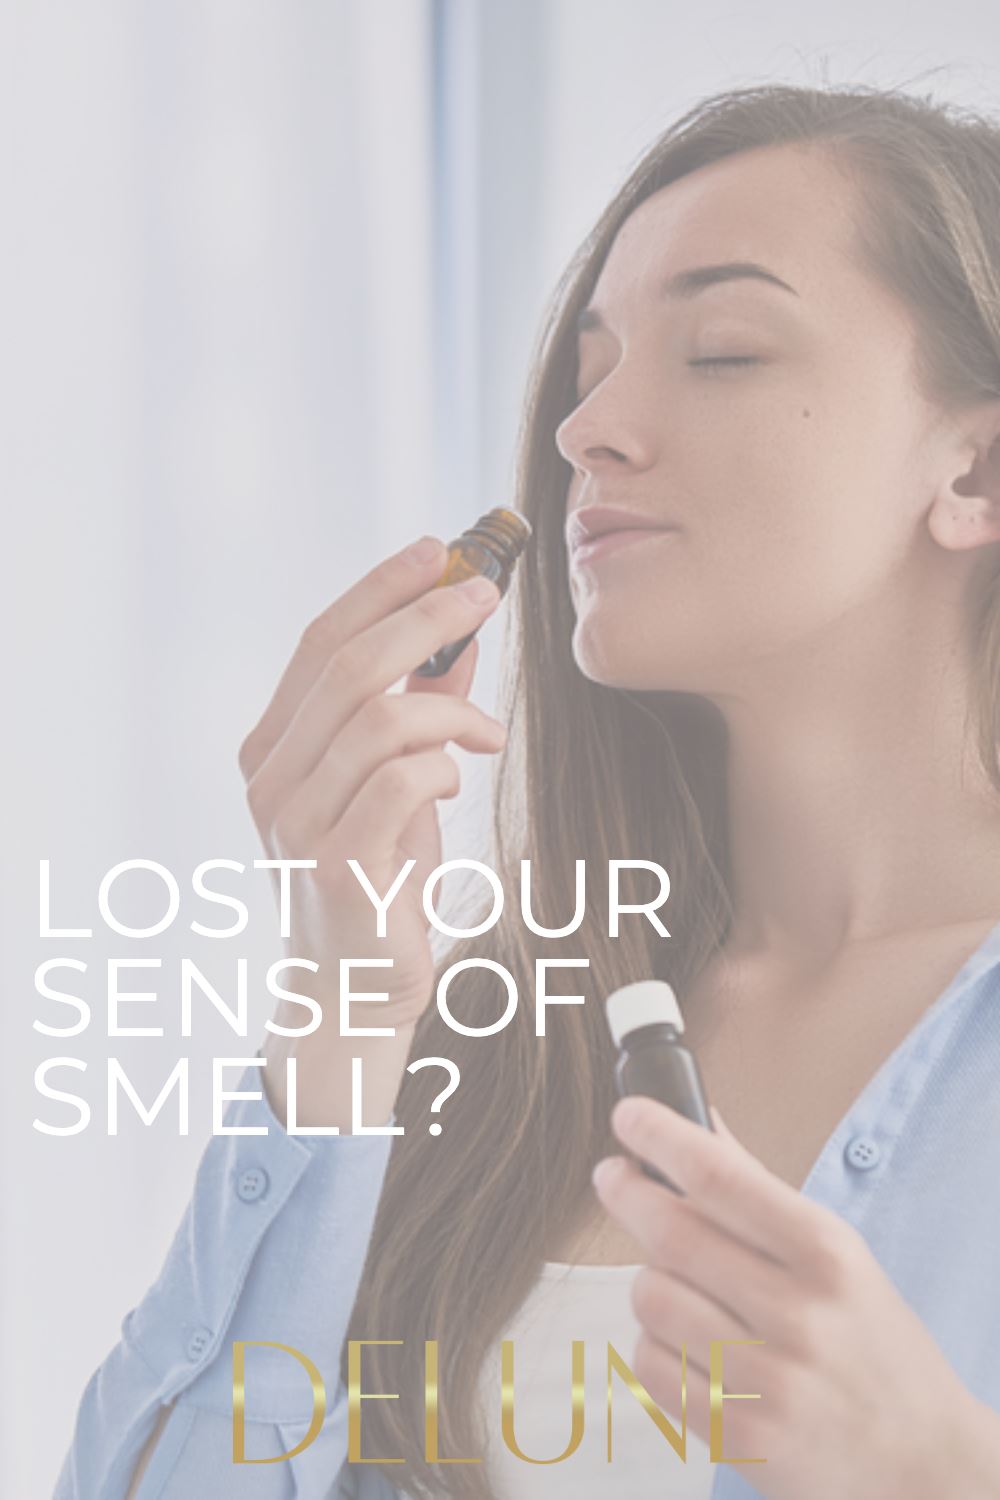 Lost Your Sense Of Smell? Retrain Your Senses With Essential Oils!